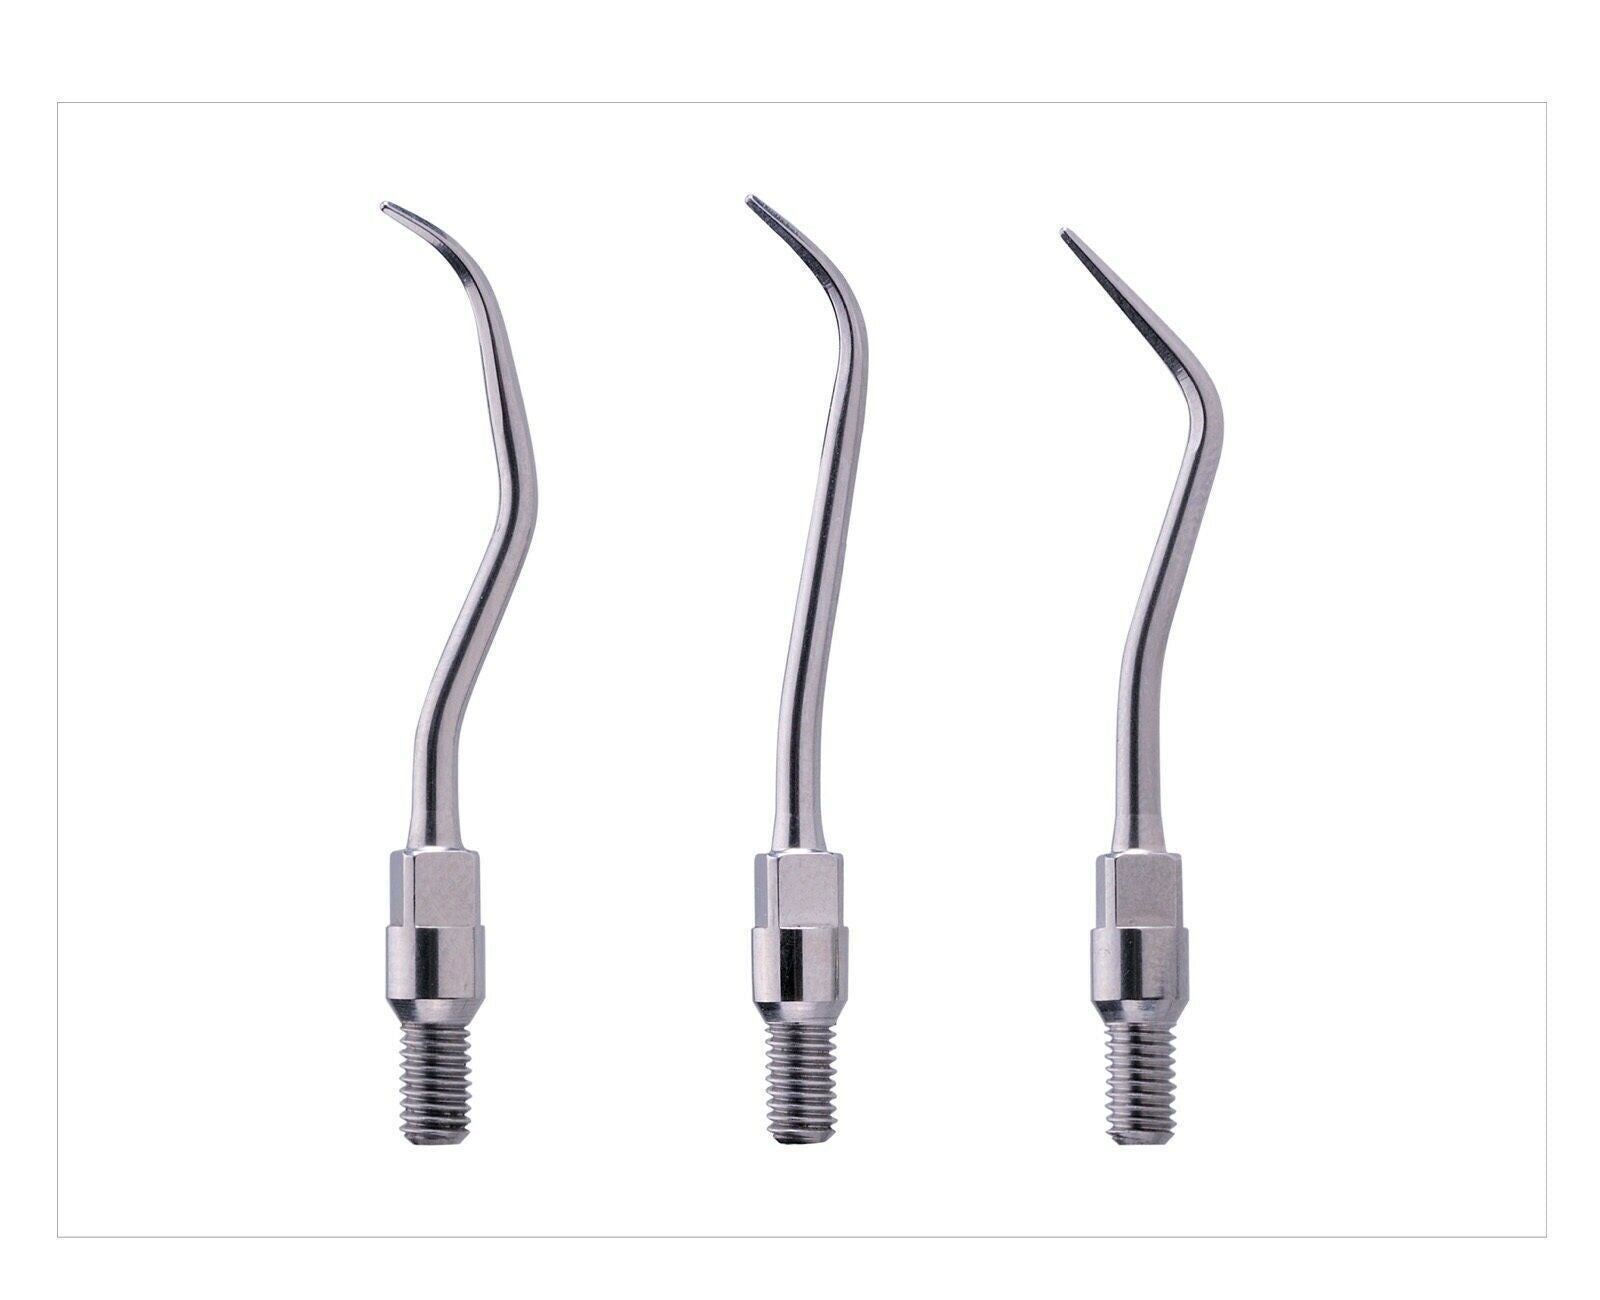 S1 S2 S3 tips For NSK Style Dental Air Scaler Handpiece